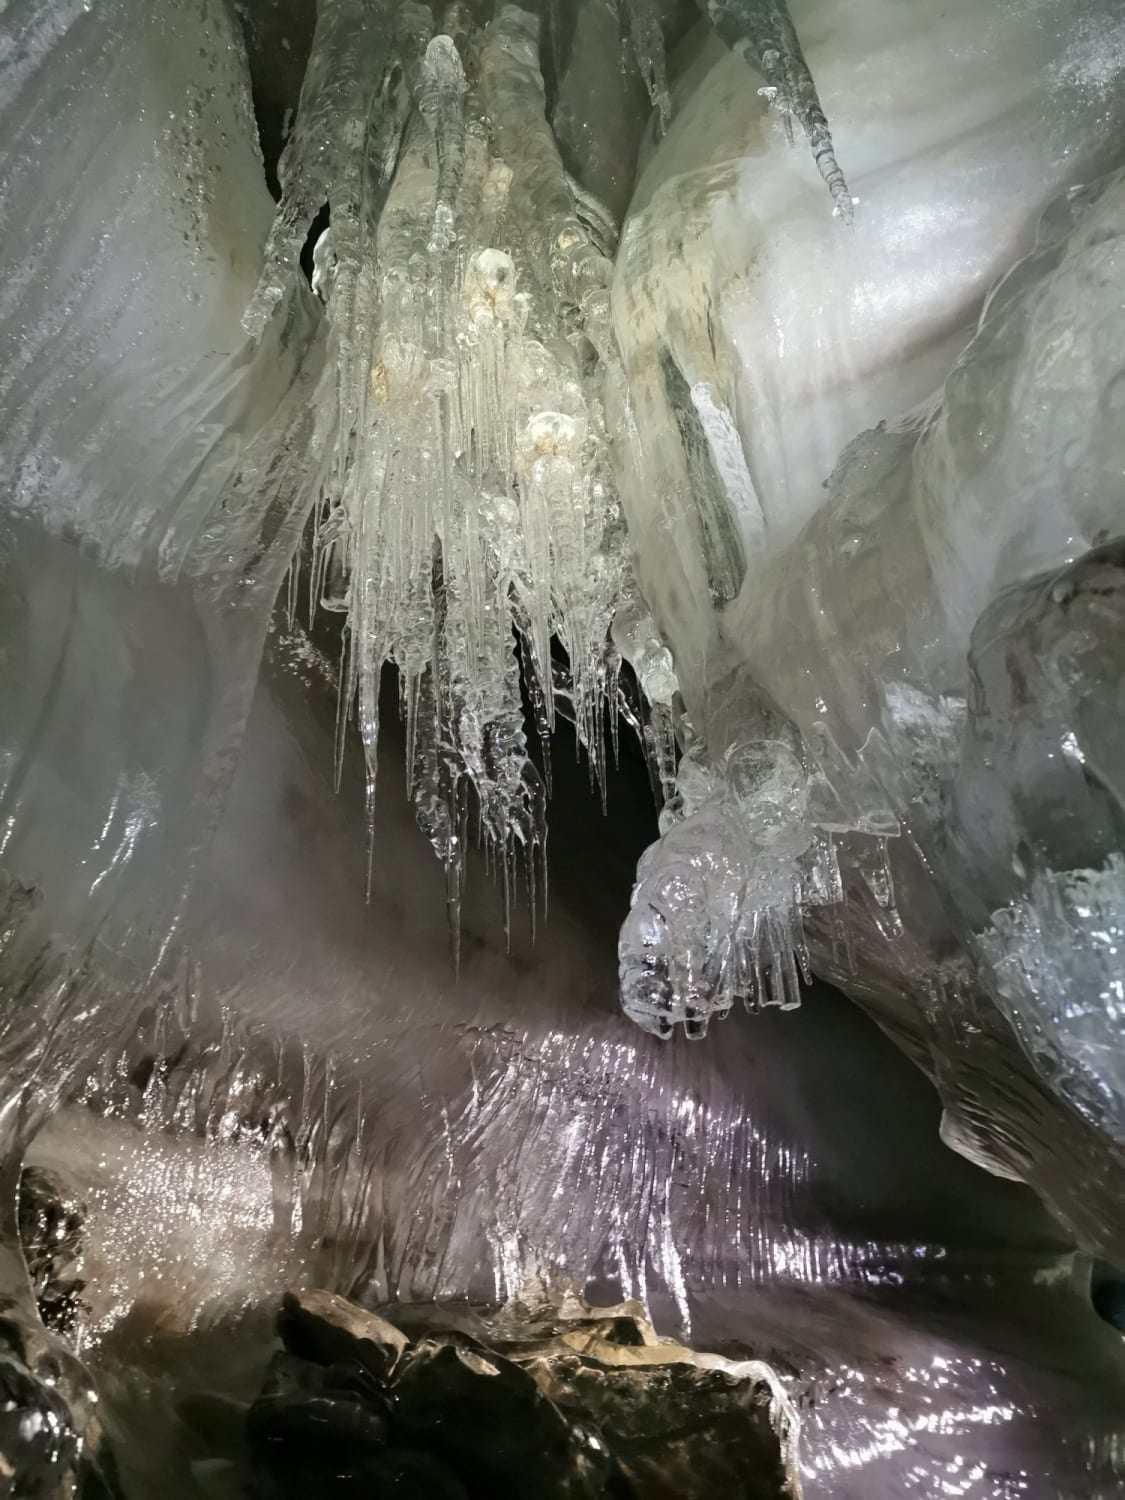 Larsbreen ice cave